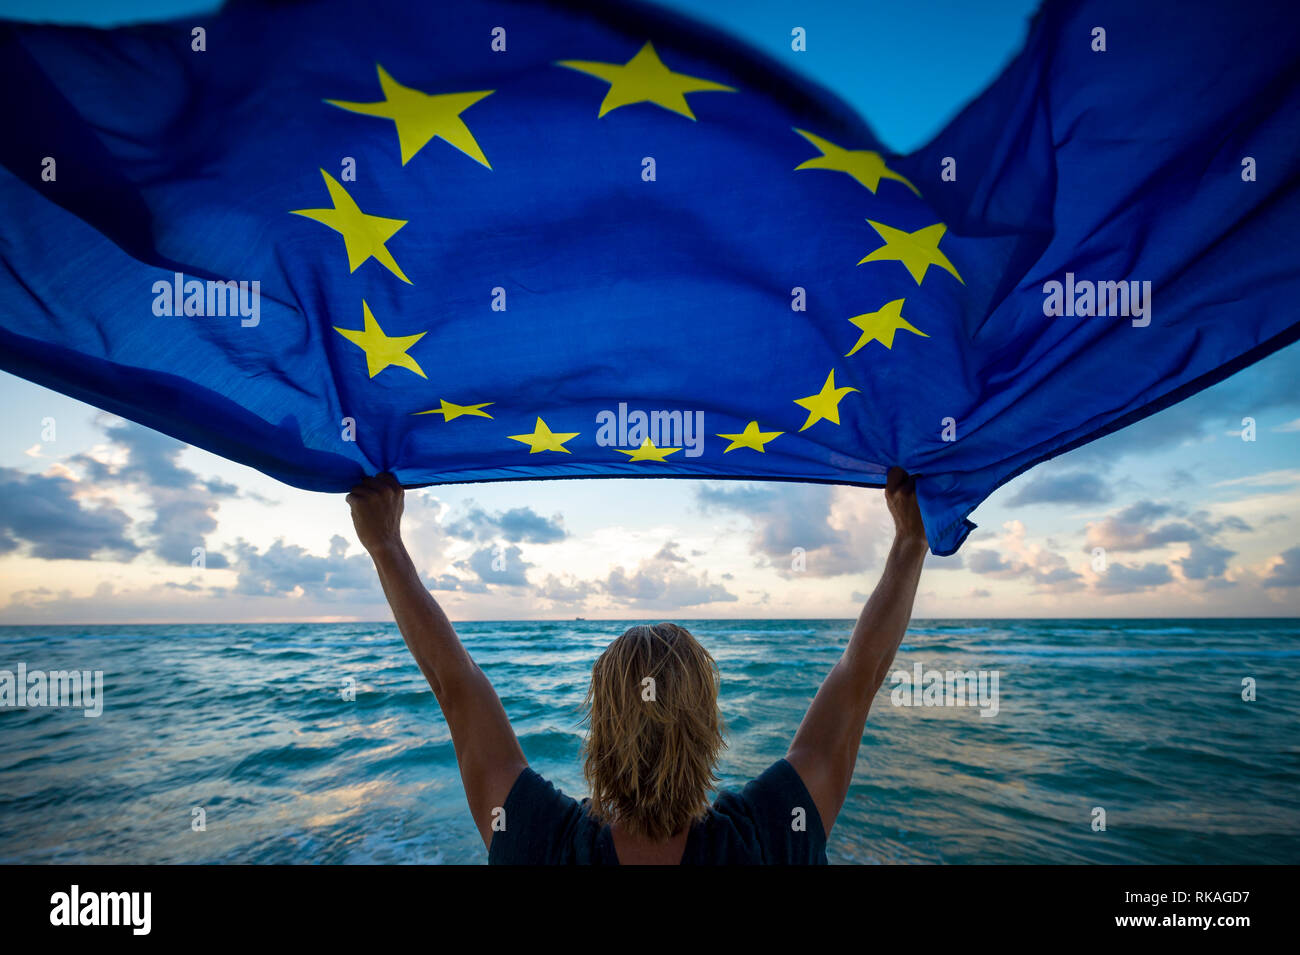 Man holding a fluttering European Union flag flying in bright morning sunlight held up by man with blond hair standing on empty Mediterranean beach Stock Photo